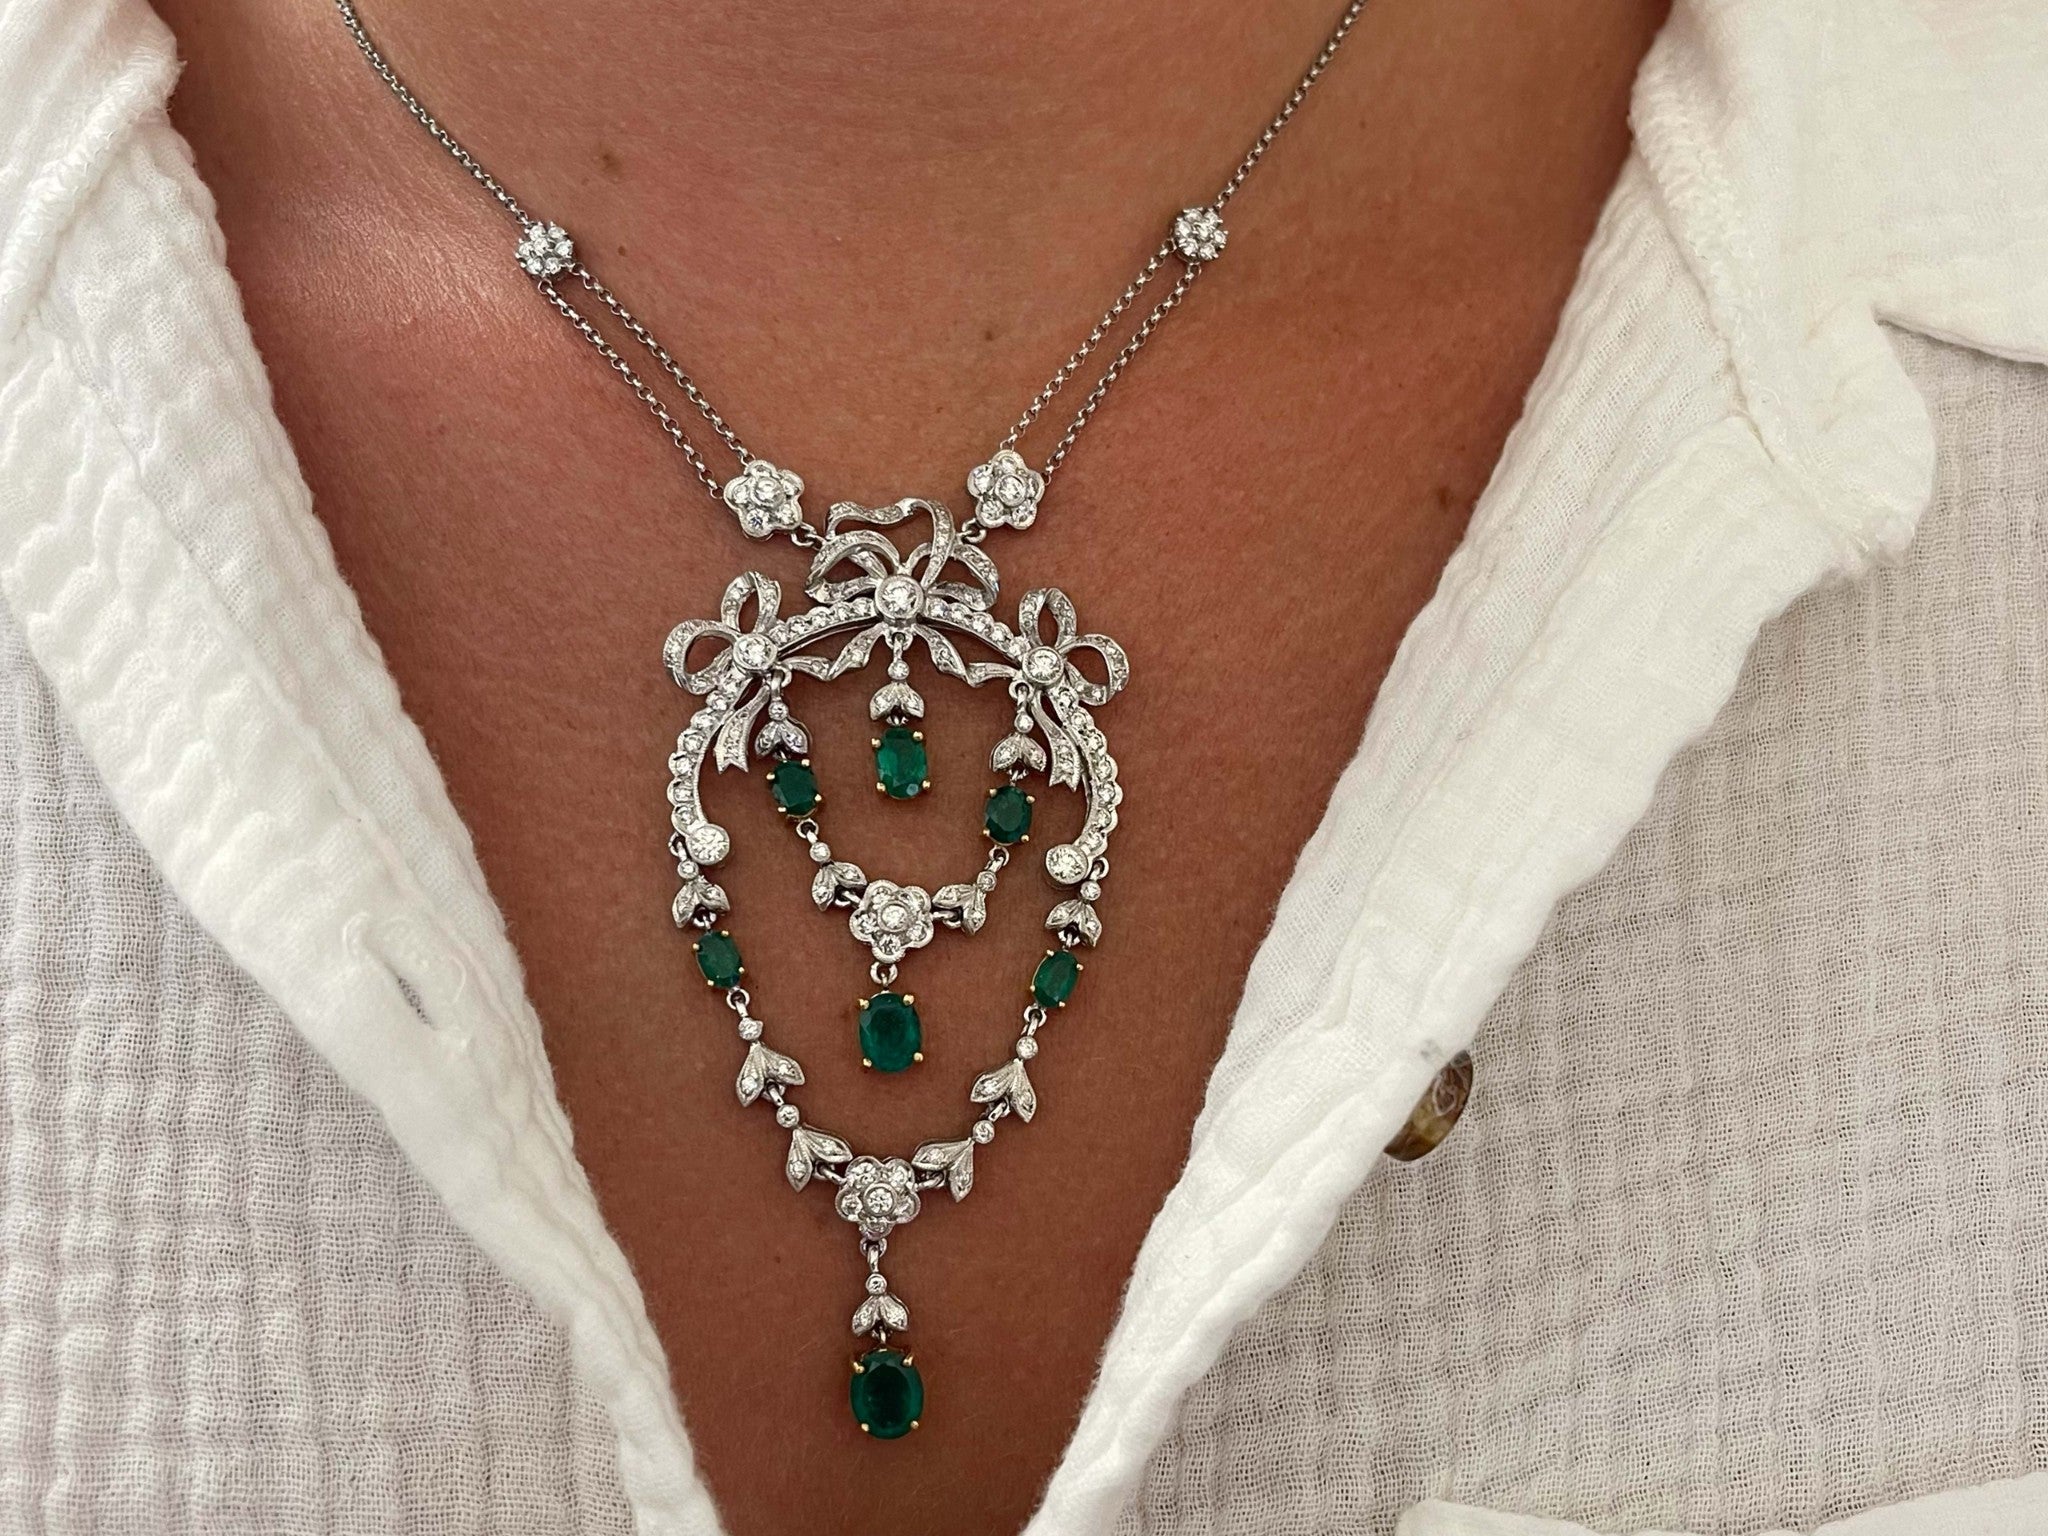 Victorian Diamond and Emerald Dangly Pendant Necklace in 18k White Gold